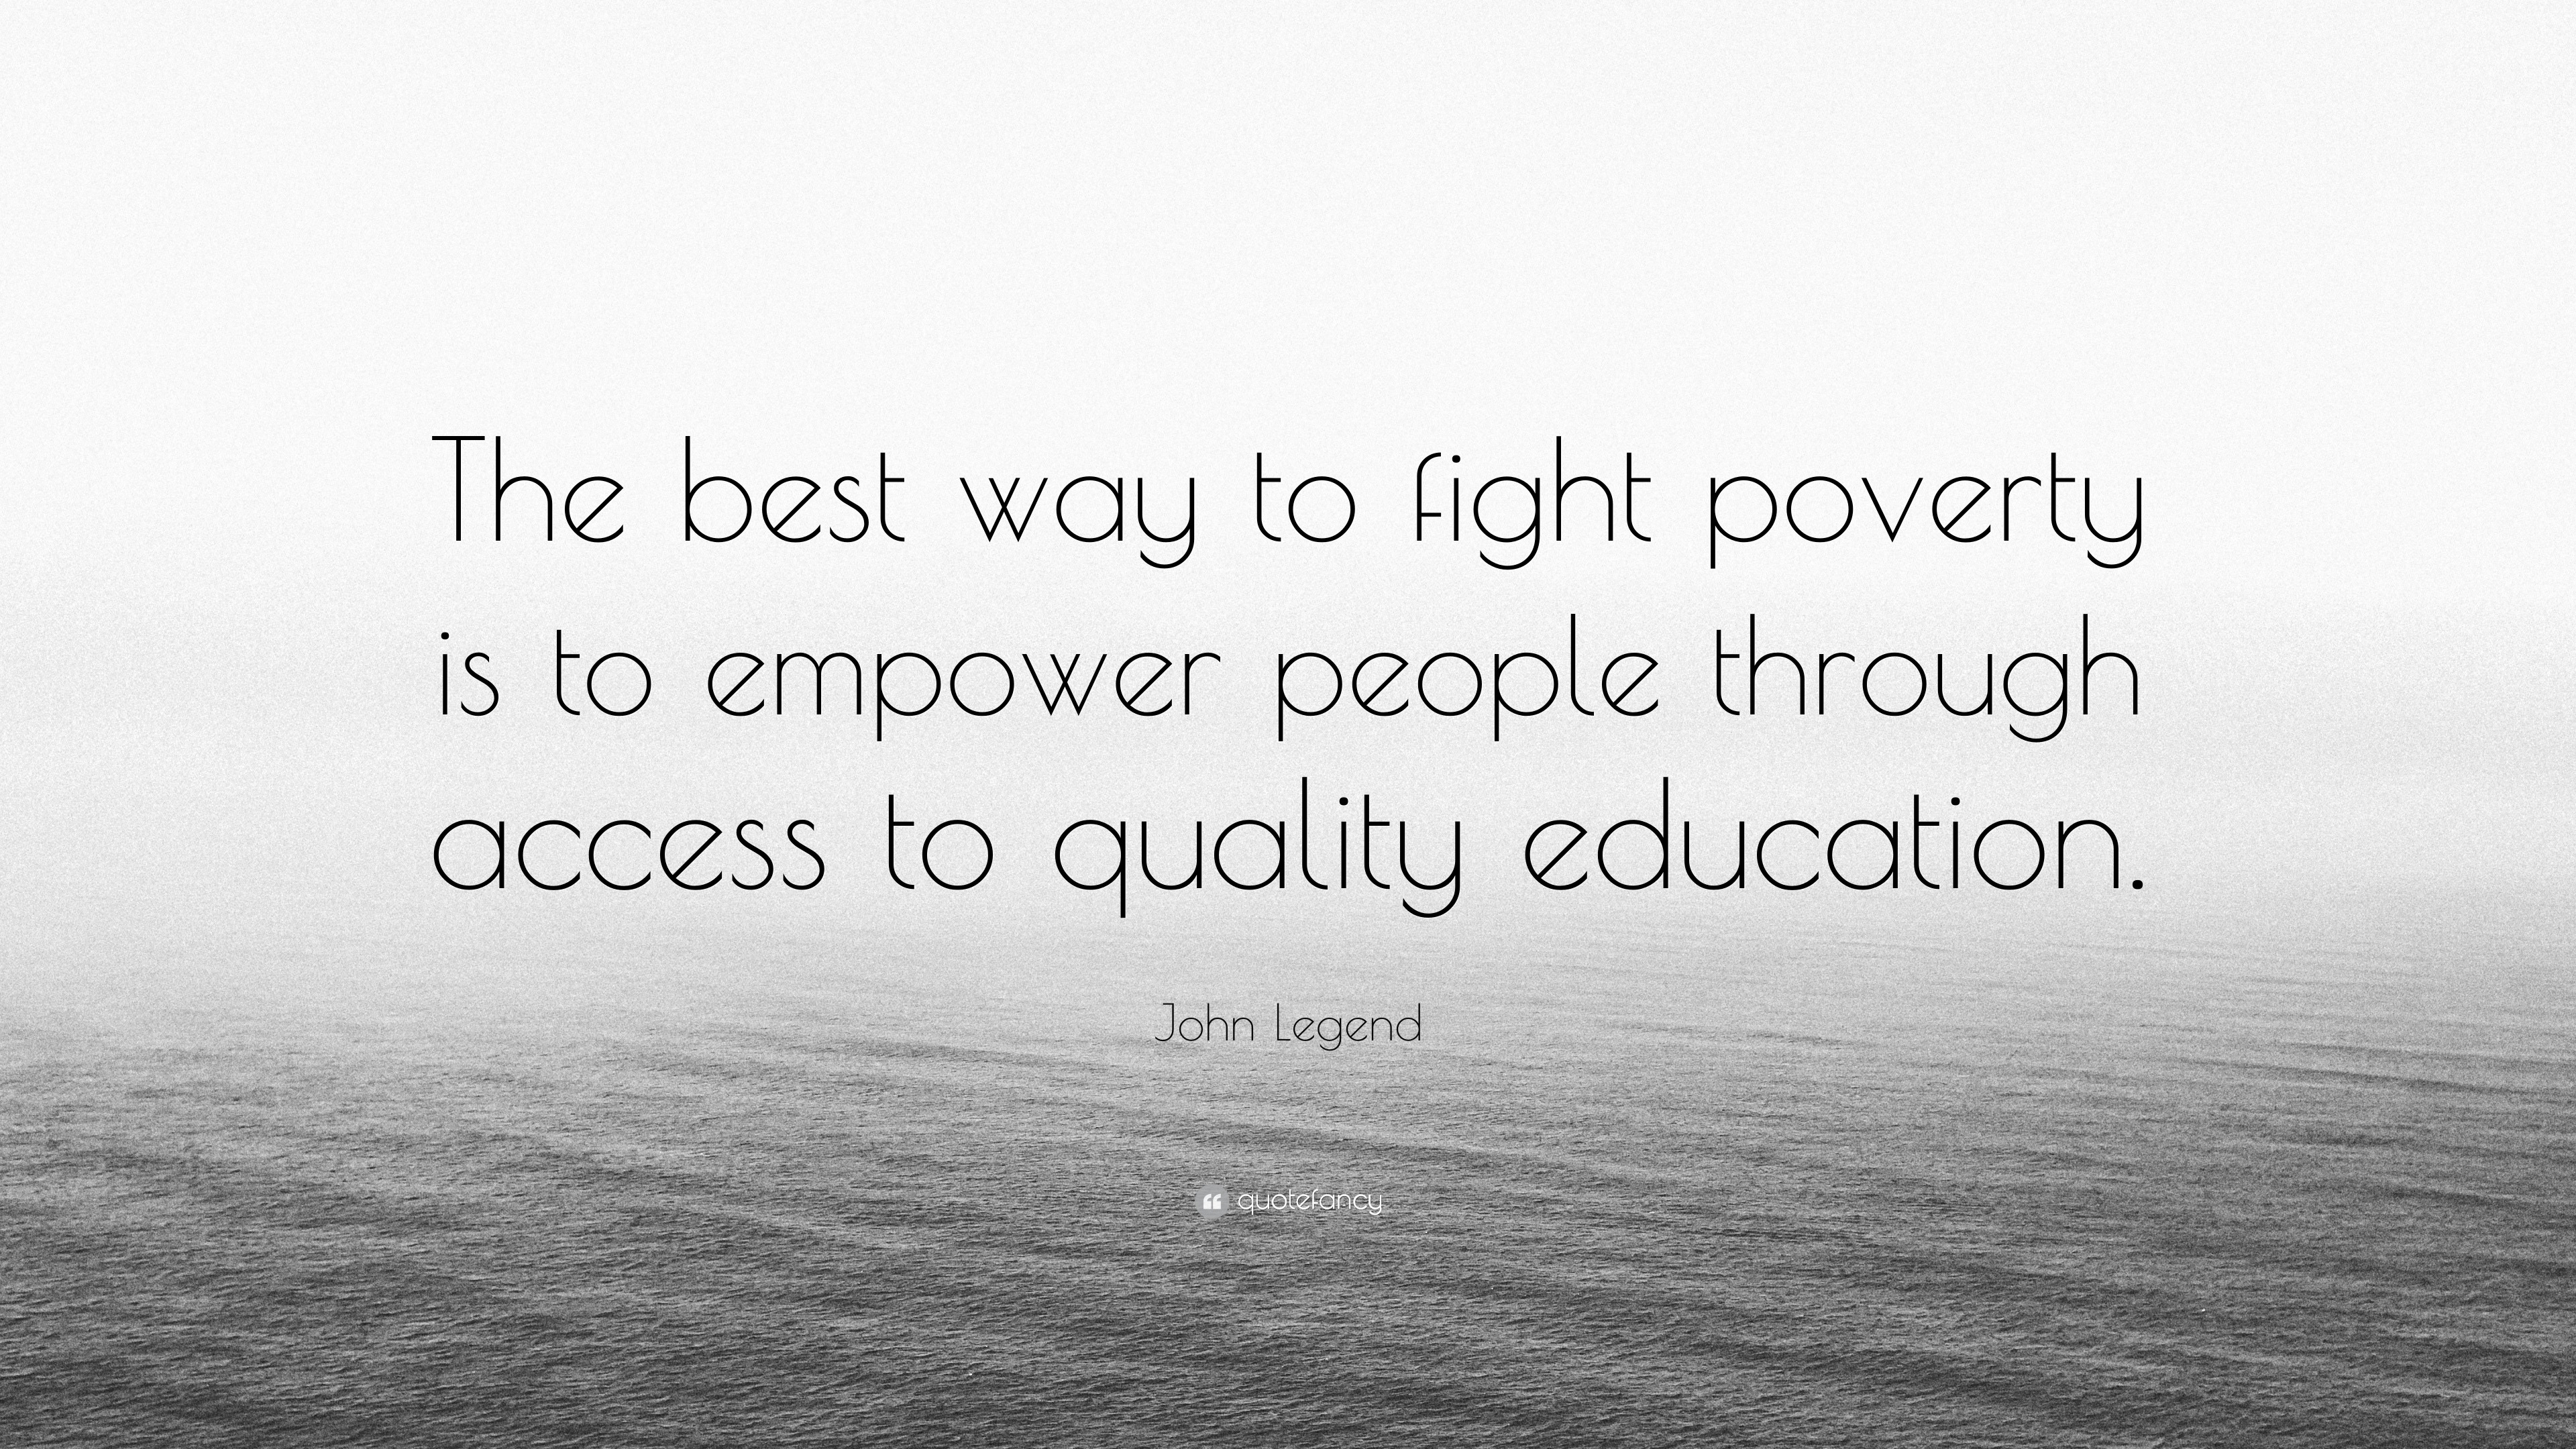 John Legend Quote: “The best way to fight poverty is to empower people